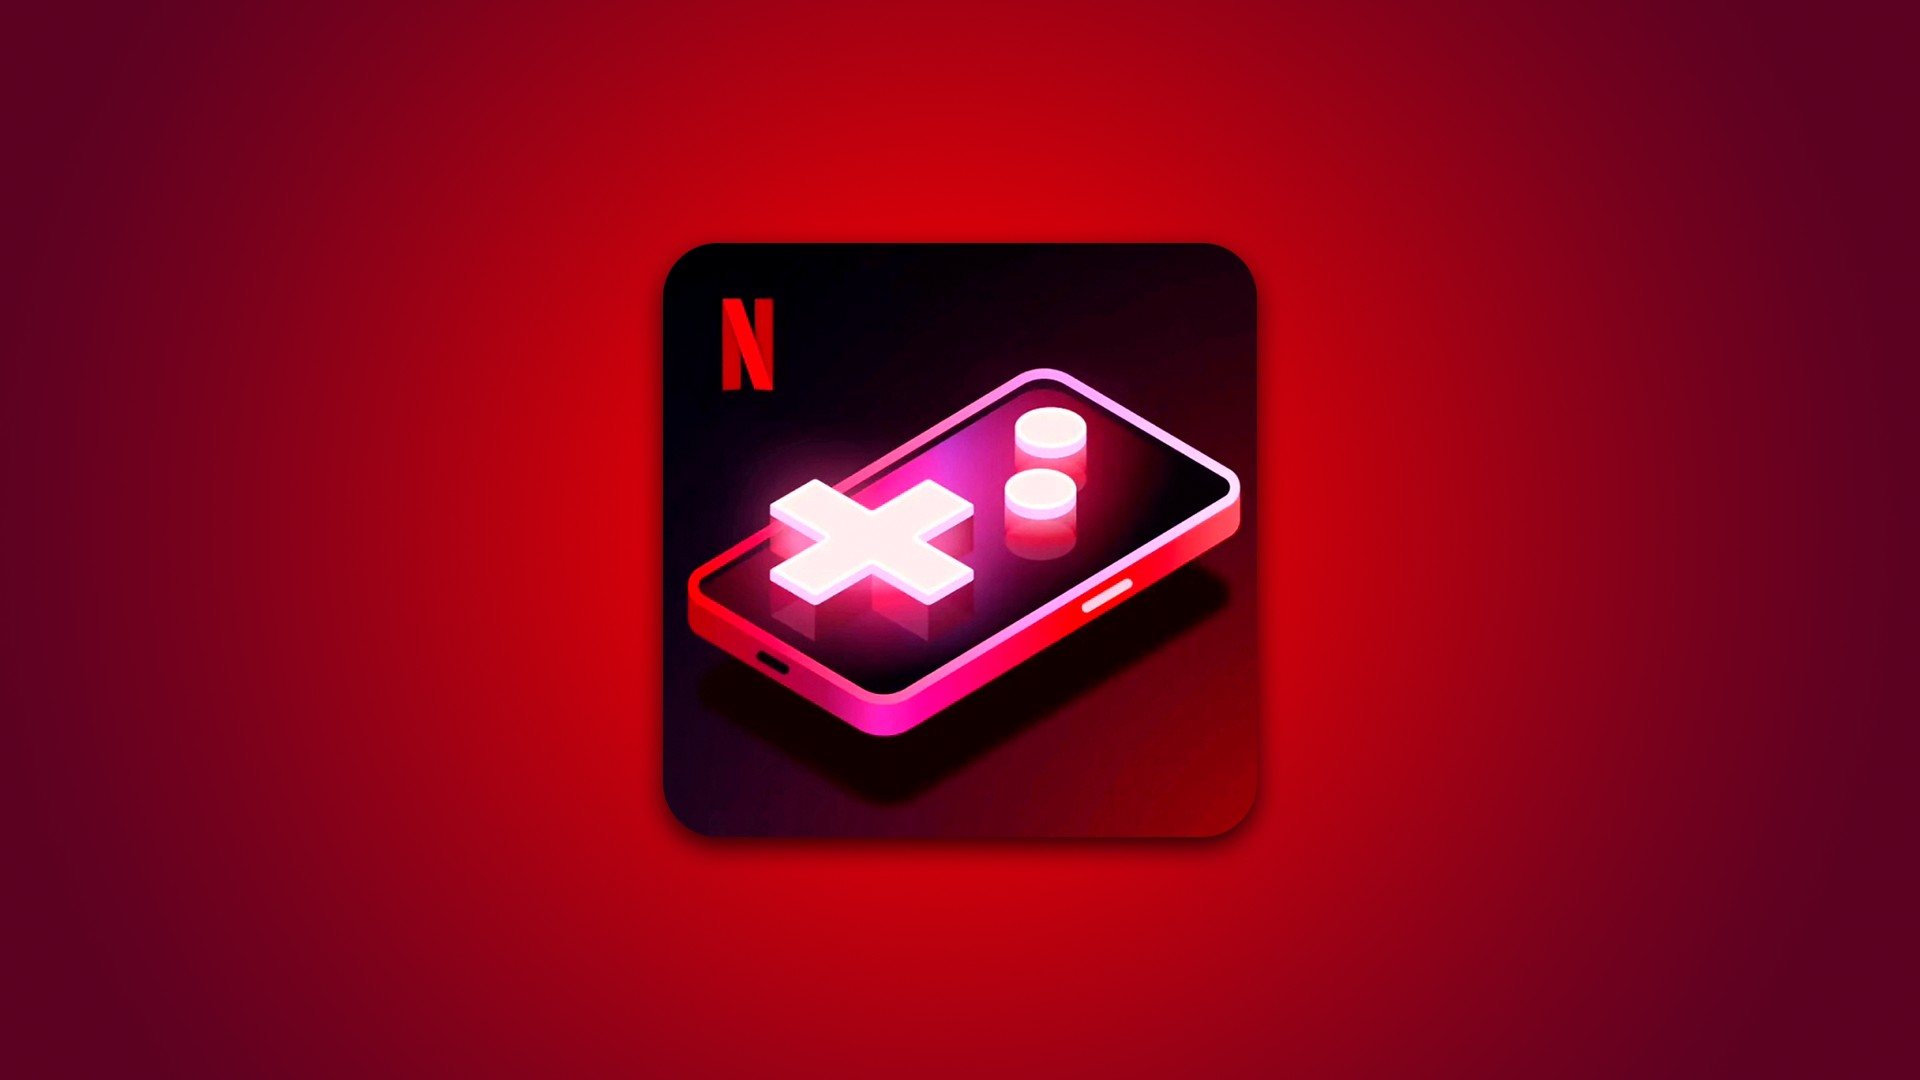 Games on Netflix Platform begins testing streaming games in Canada and